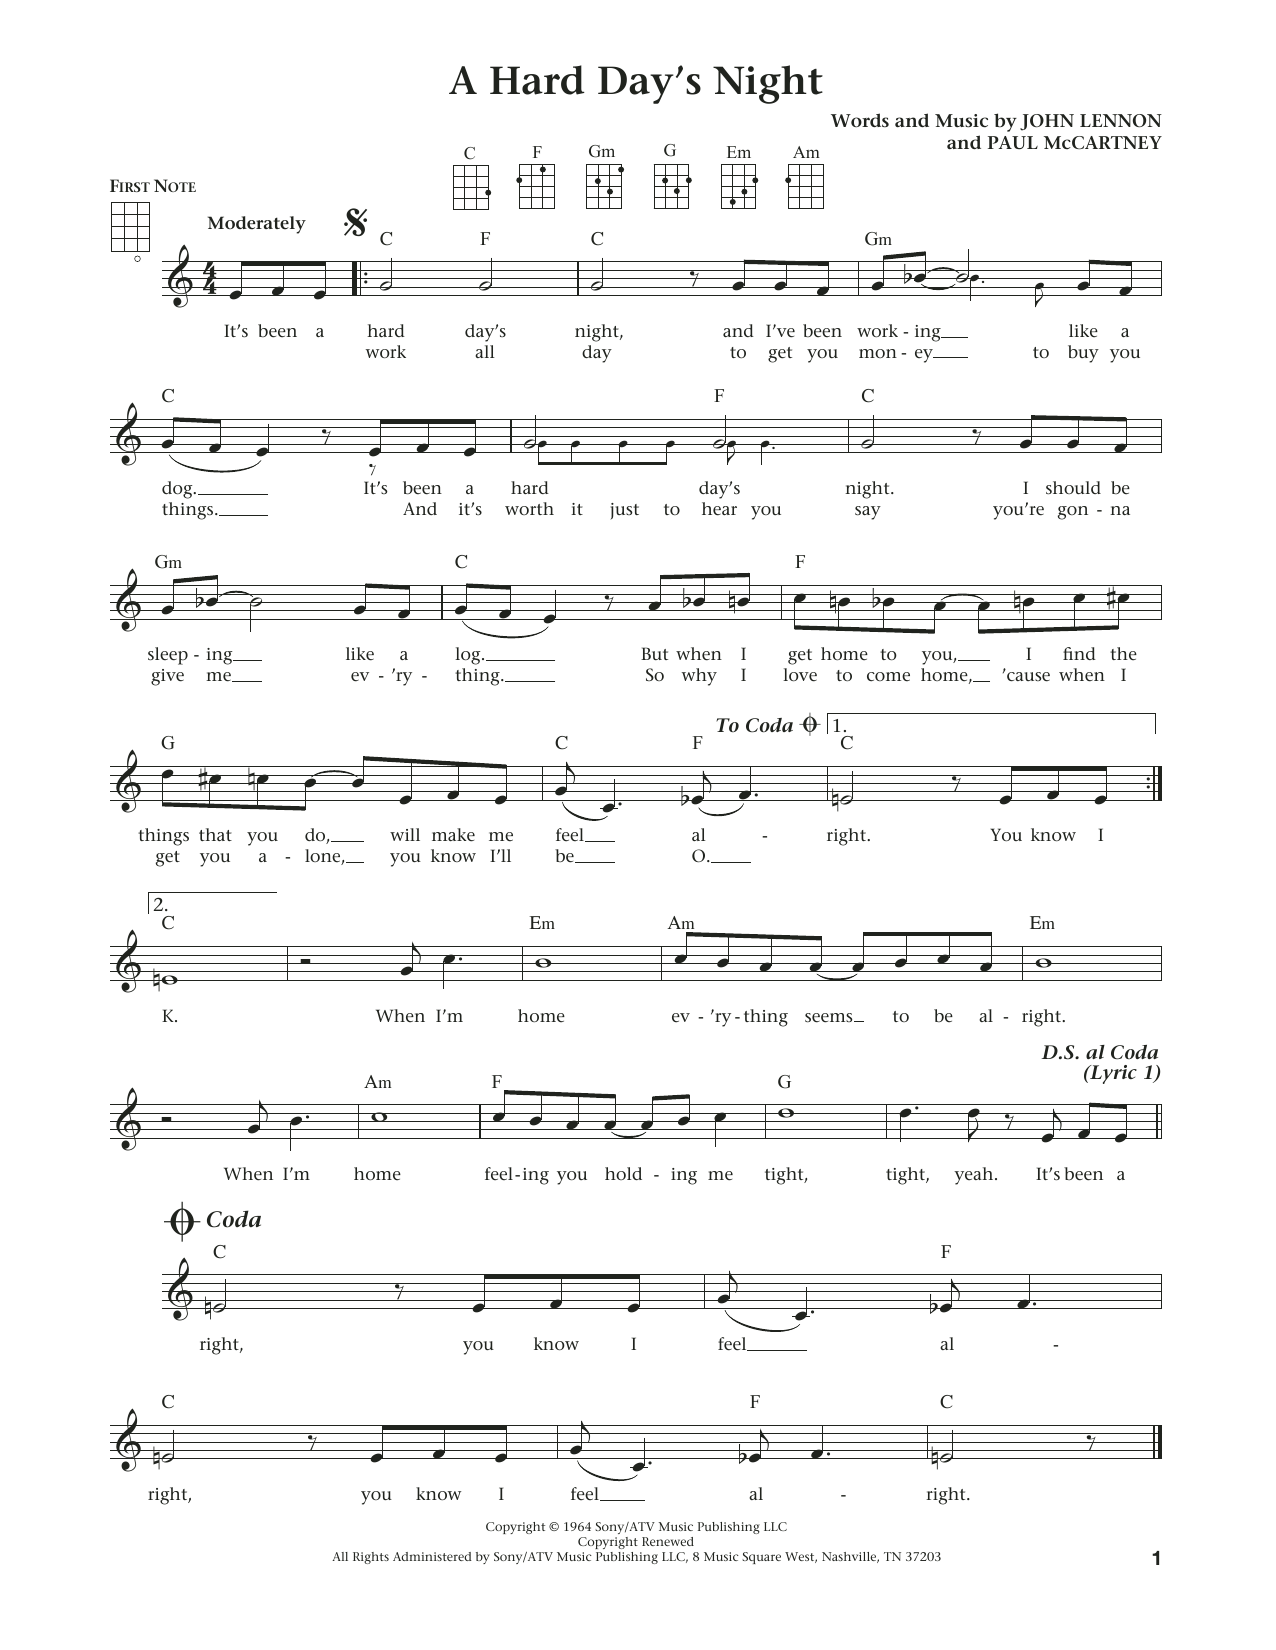 Download The Beatles A Hard Day's Night (from The Daily Ukul Sheet Music